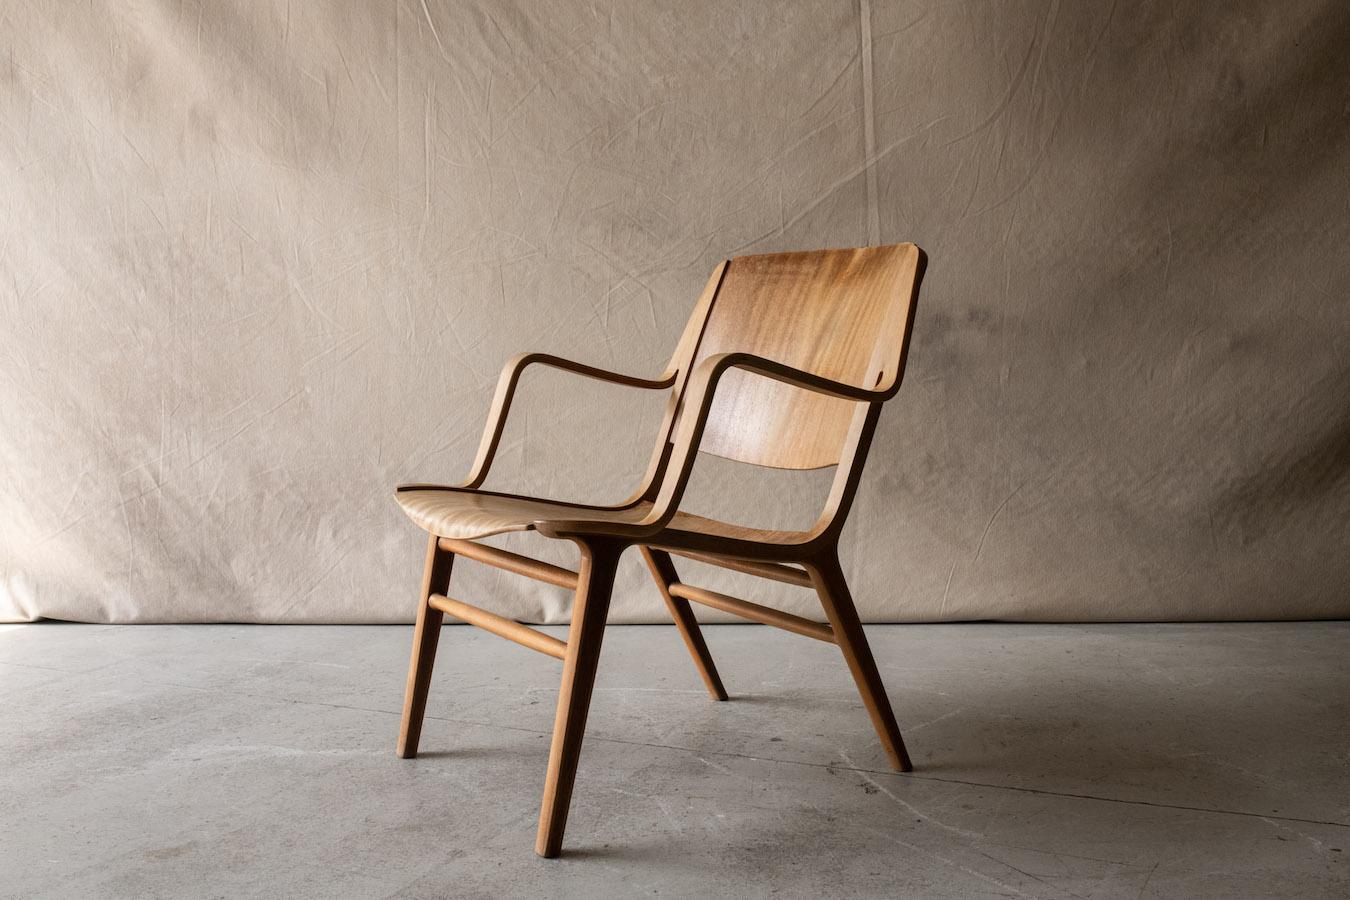 Vintage Peter Hvidt & Orla Mølgaard Nielsen lounge chair, Model Ax, circa 1960. Teak and beech construction with nice wear and patina.

We don't have the time to write an extensive description on each of our pieces. We prefer to speak directly with